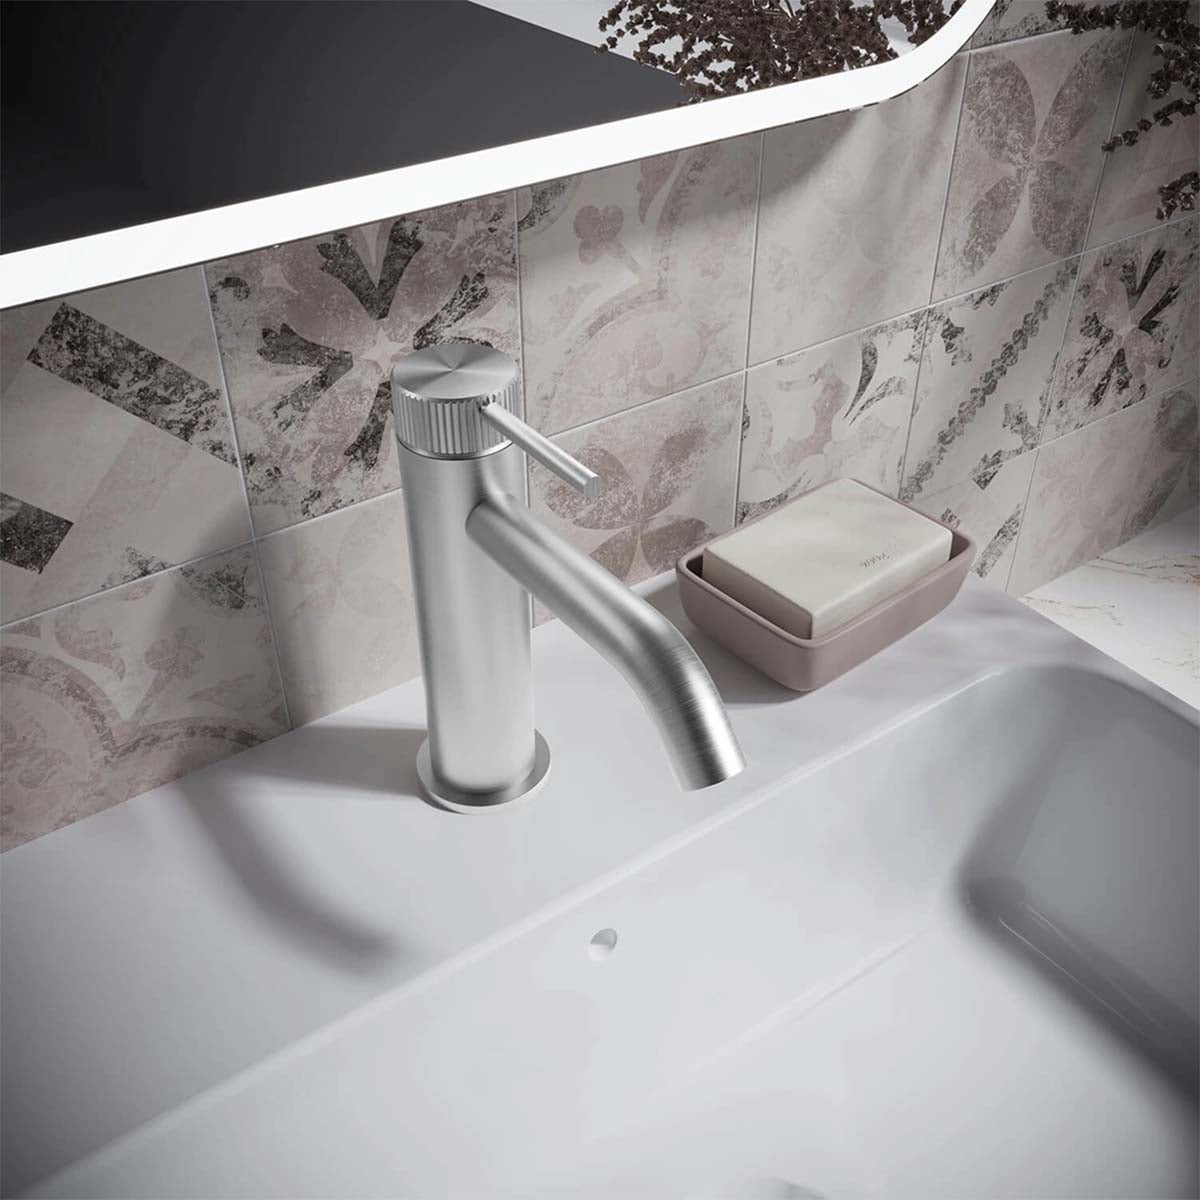 Crosswater 3ONE6 Basin Mixer Tap Monobloc - 316 Stainless Steel Lifestyle